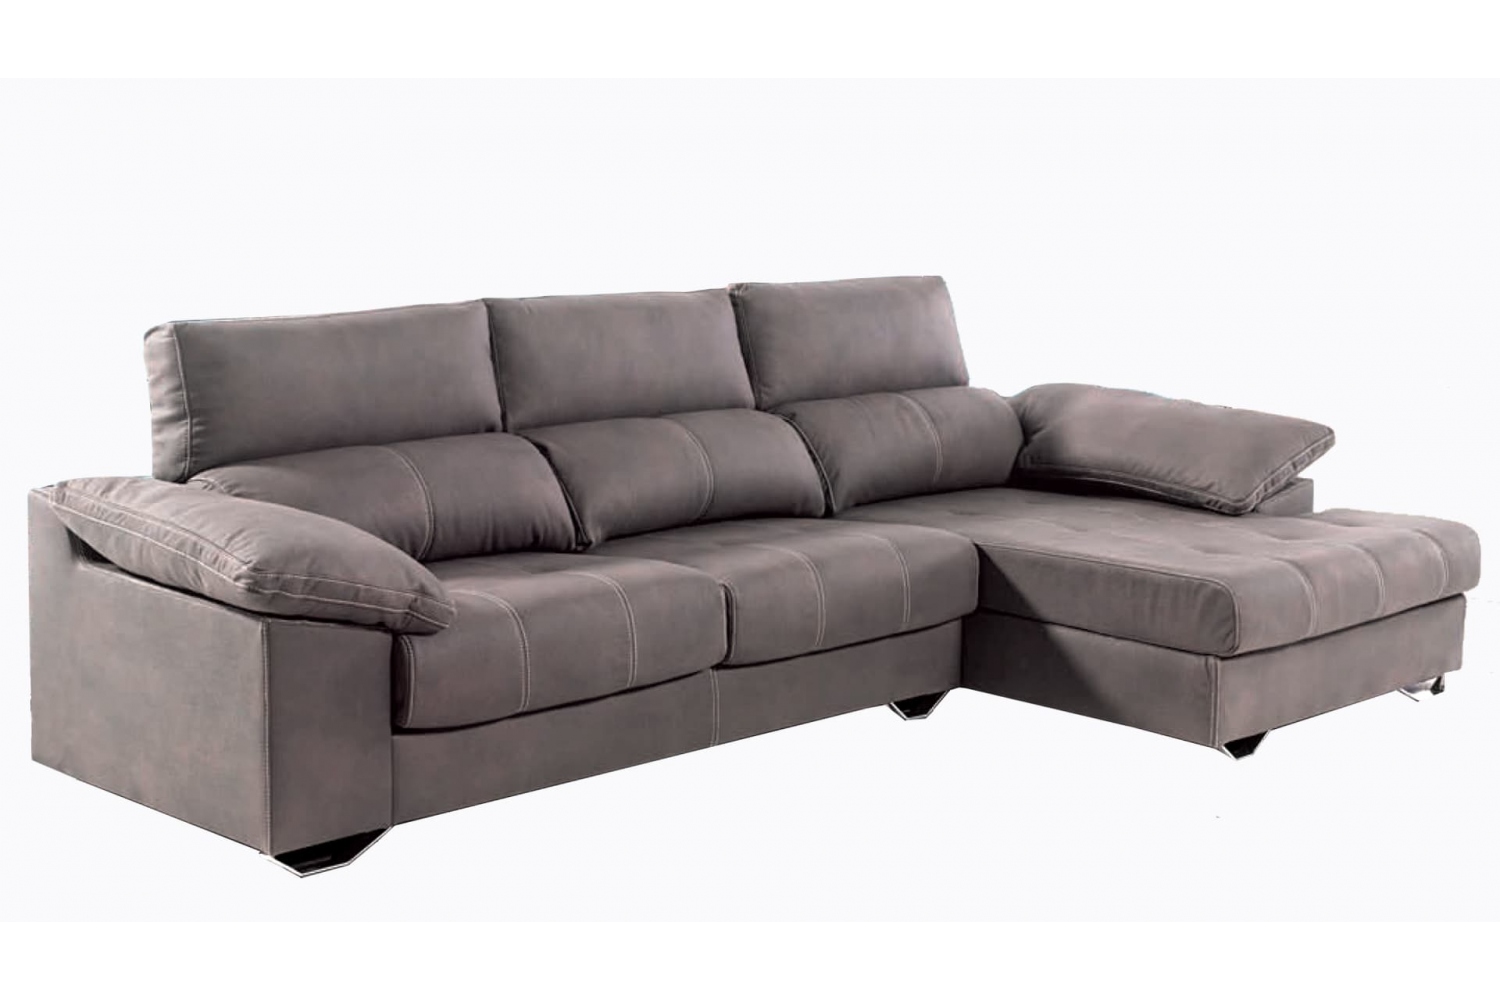 Sofá chaiselongue extraible y reclinable